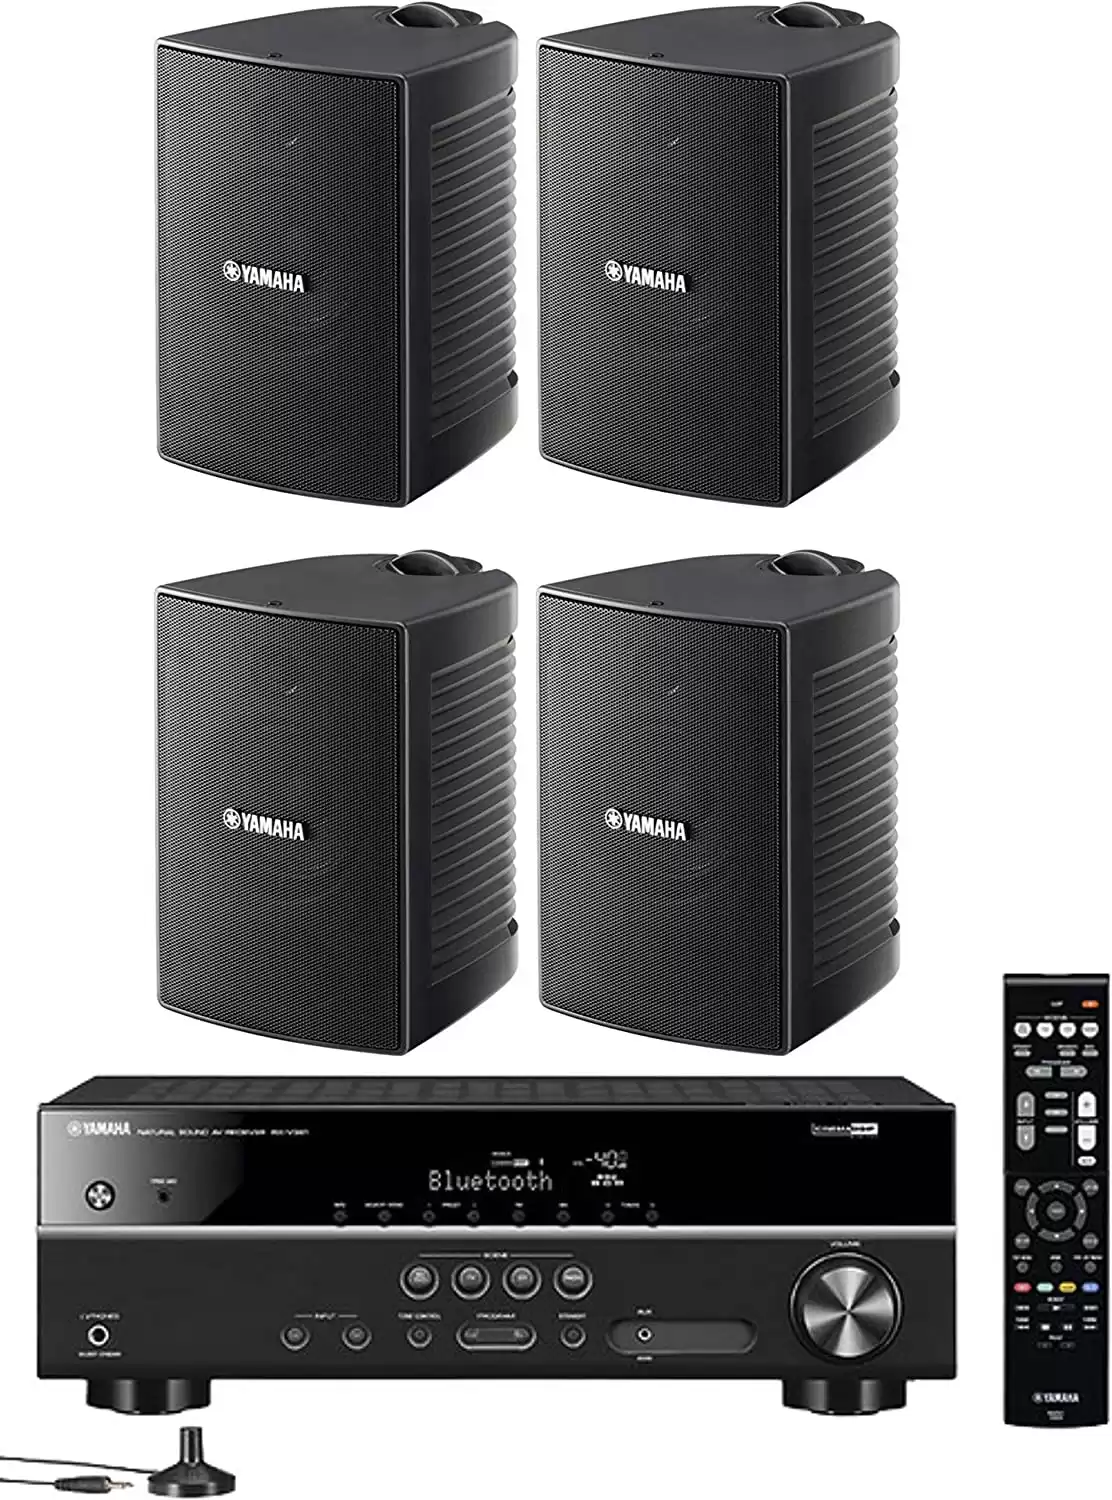 Yamaha 5.1-Channel Wireless Bluetooth 4K A/V Home Theater Receiver + Yamaha Natural Sound High Performance 2-Way Indoor/Outdoor Weatherproof Speakers